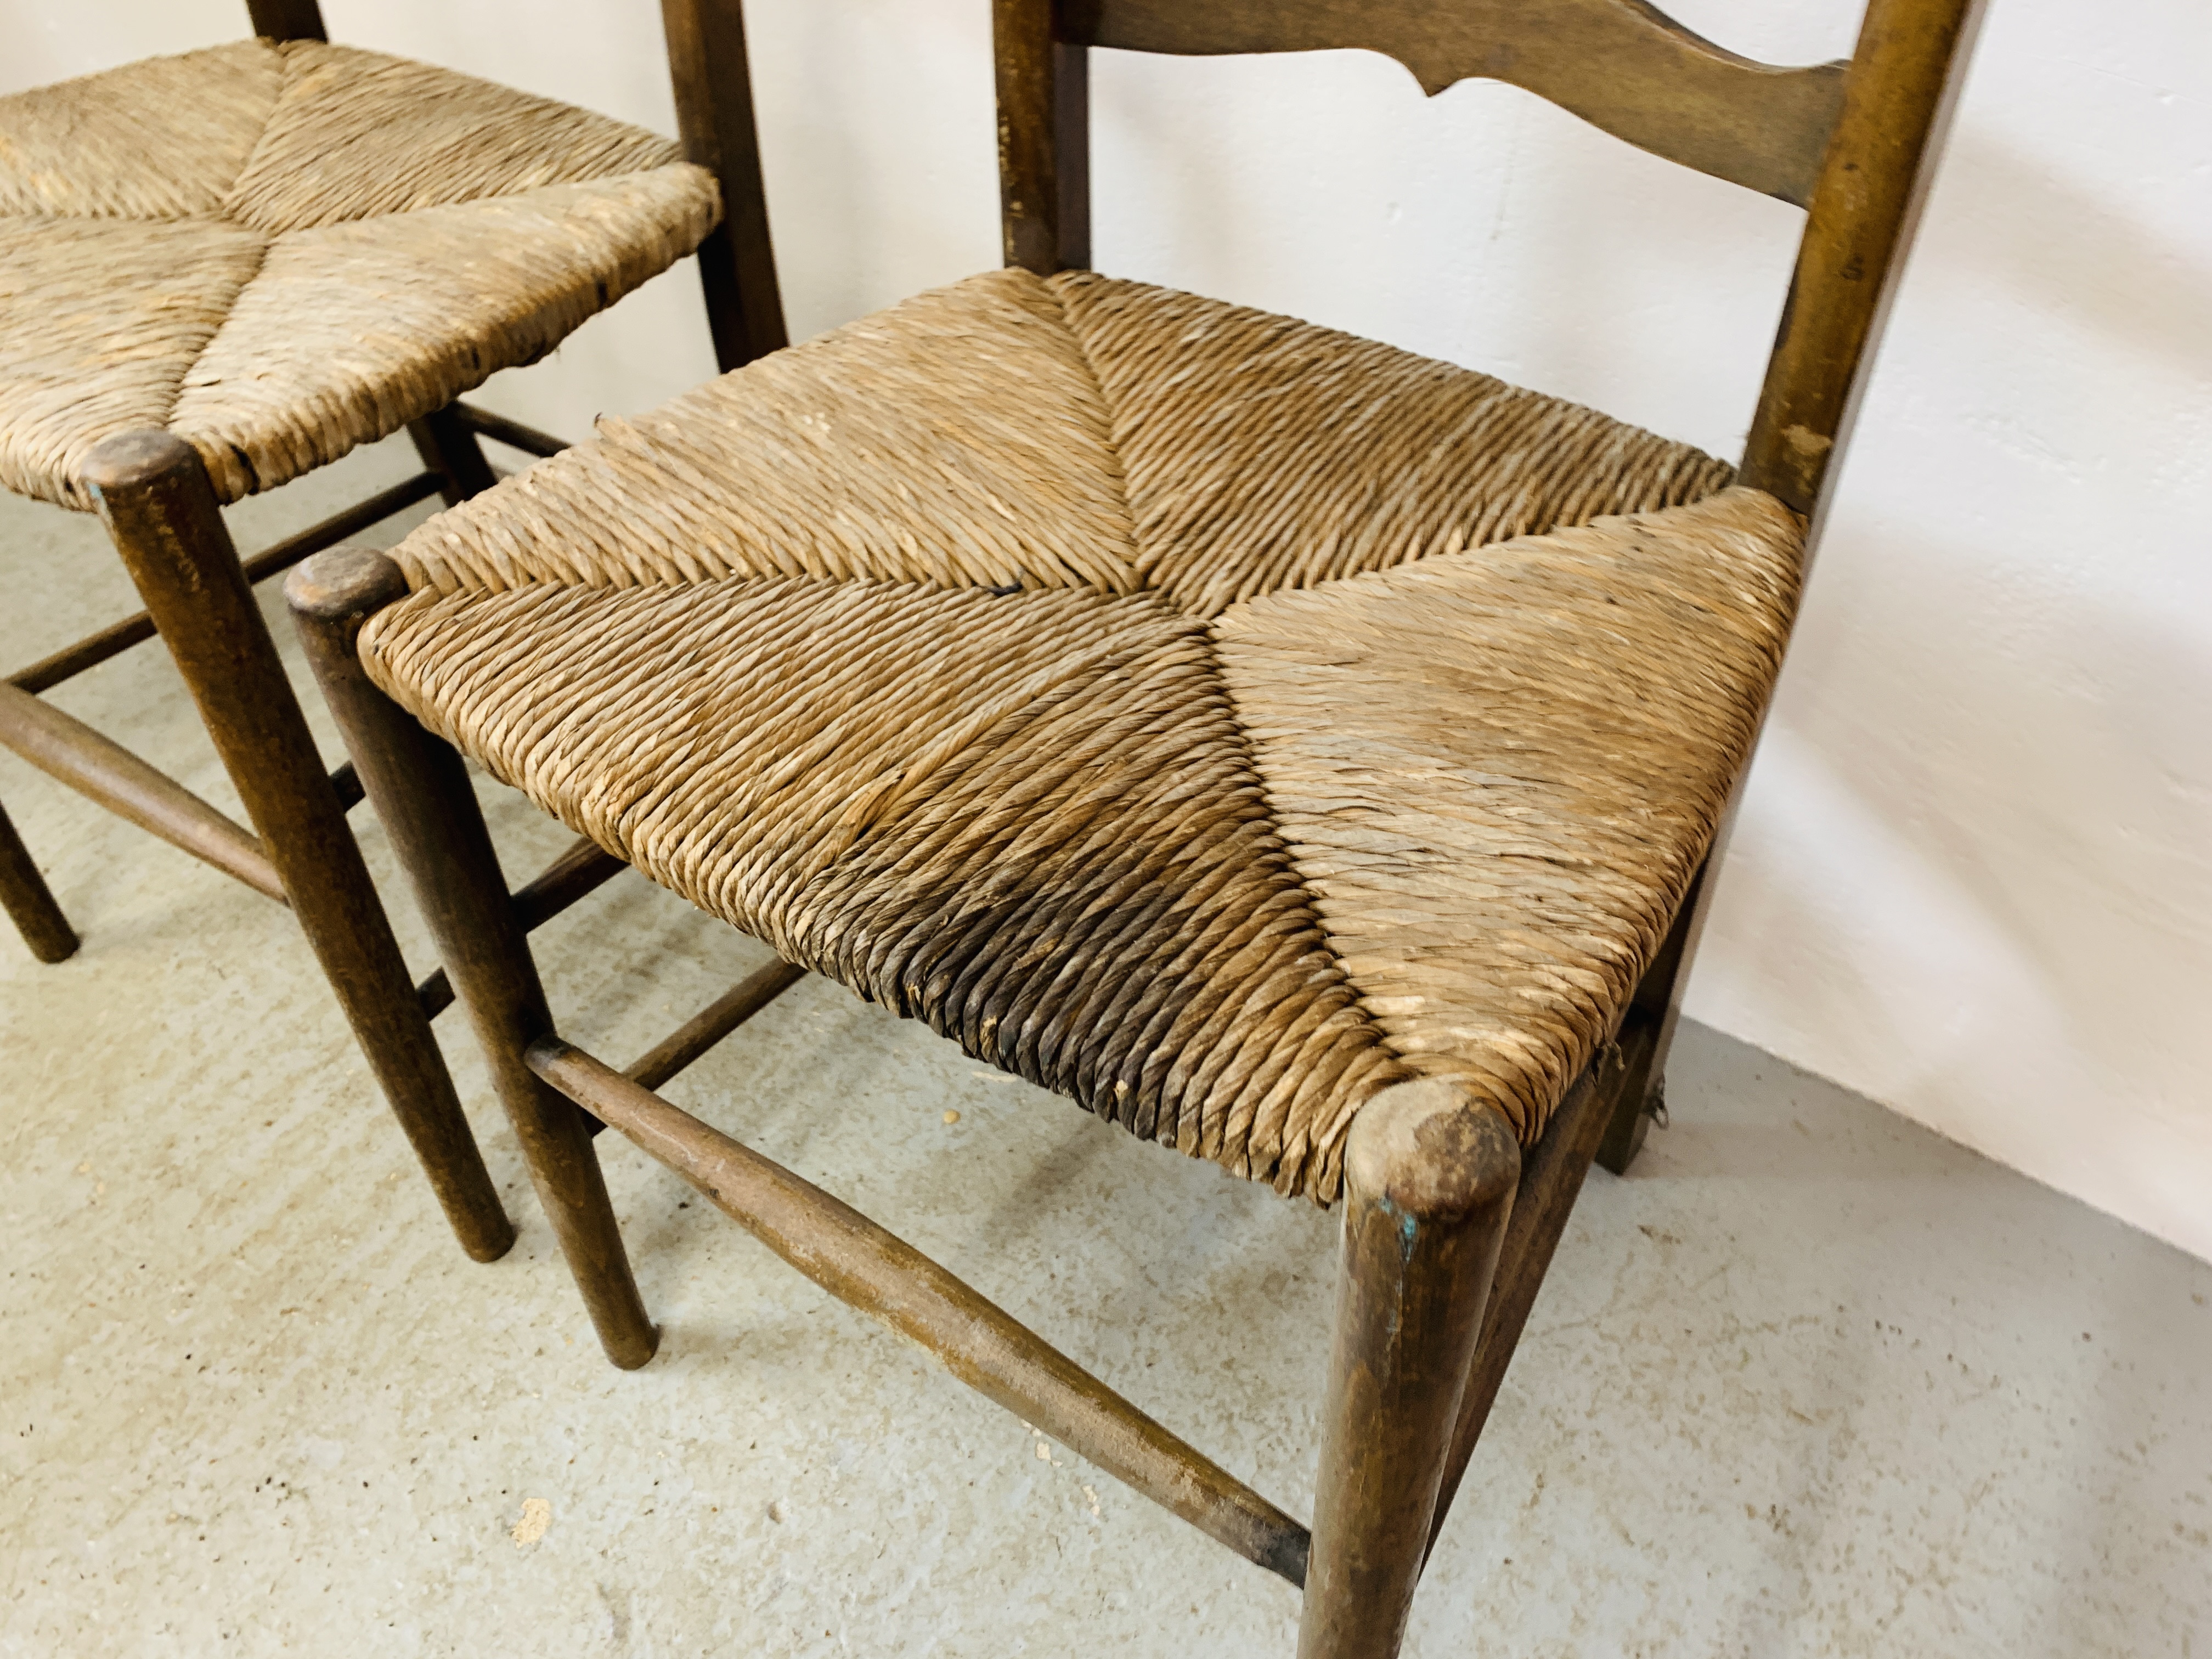 A PAIR OF ANTIQUE OAK LADDER BACK RUSH SEATED CHAIRS - Image 4 of 8